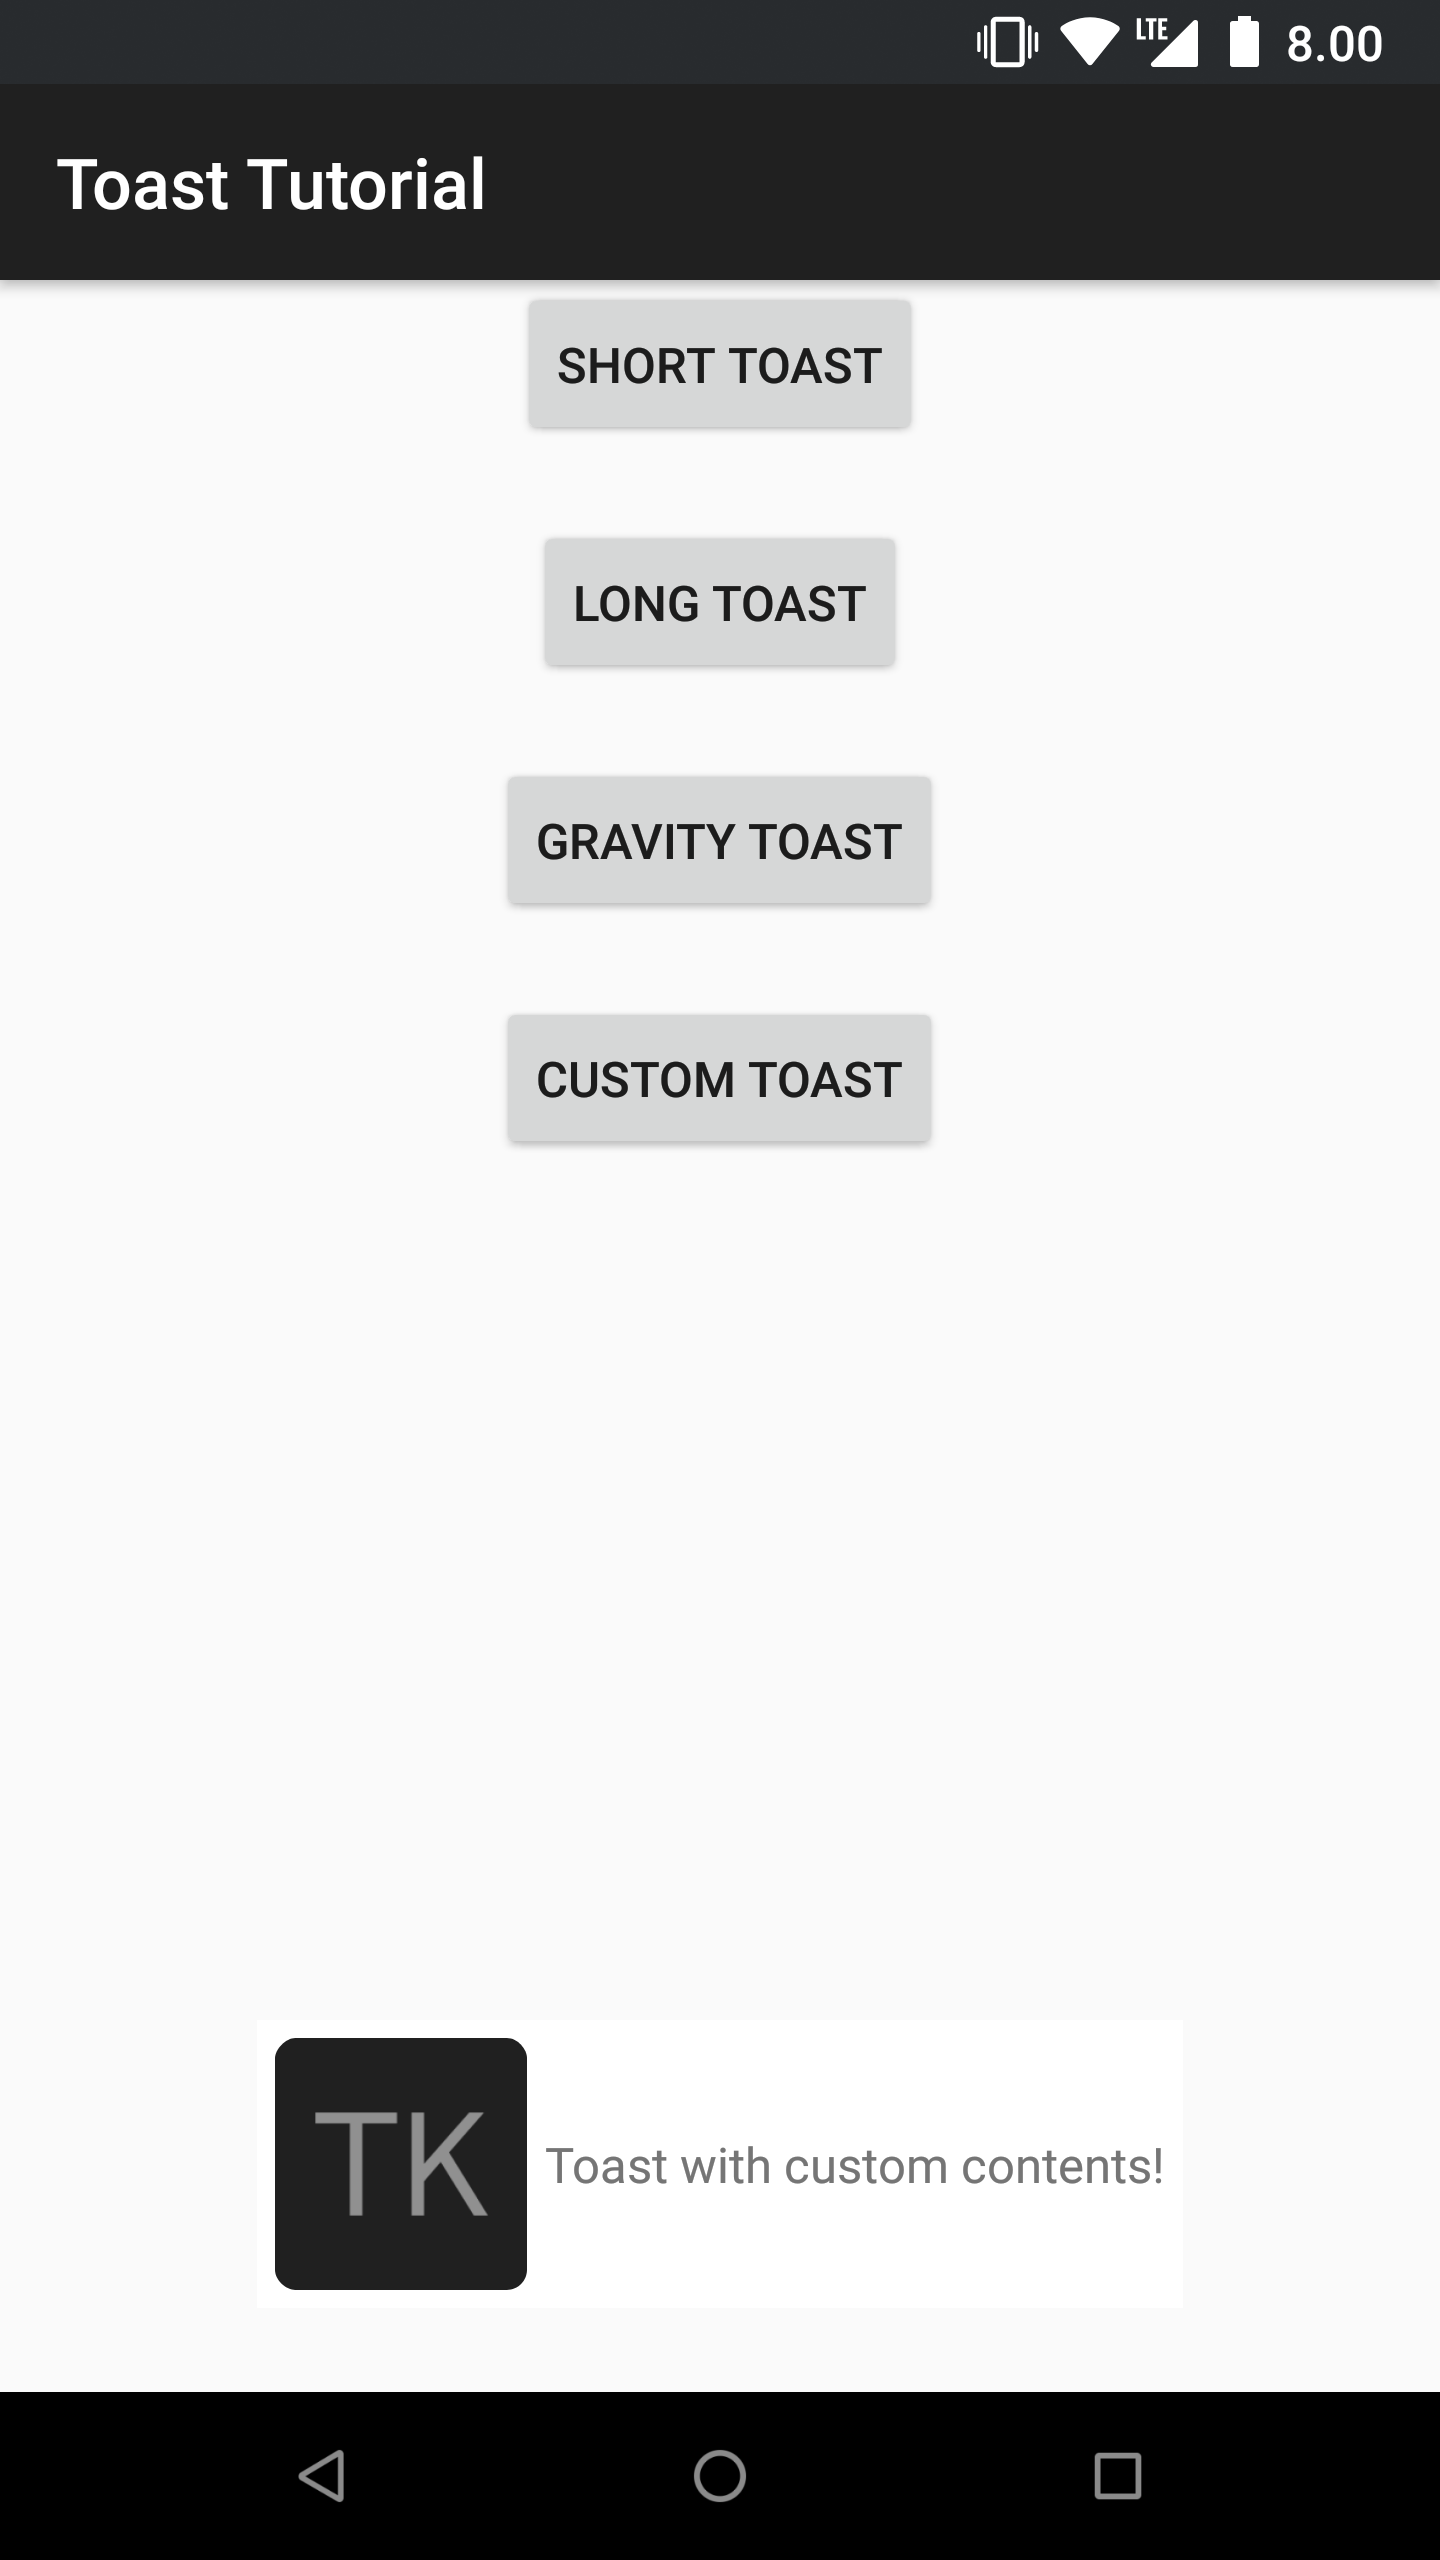 Toast with custom content